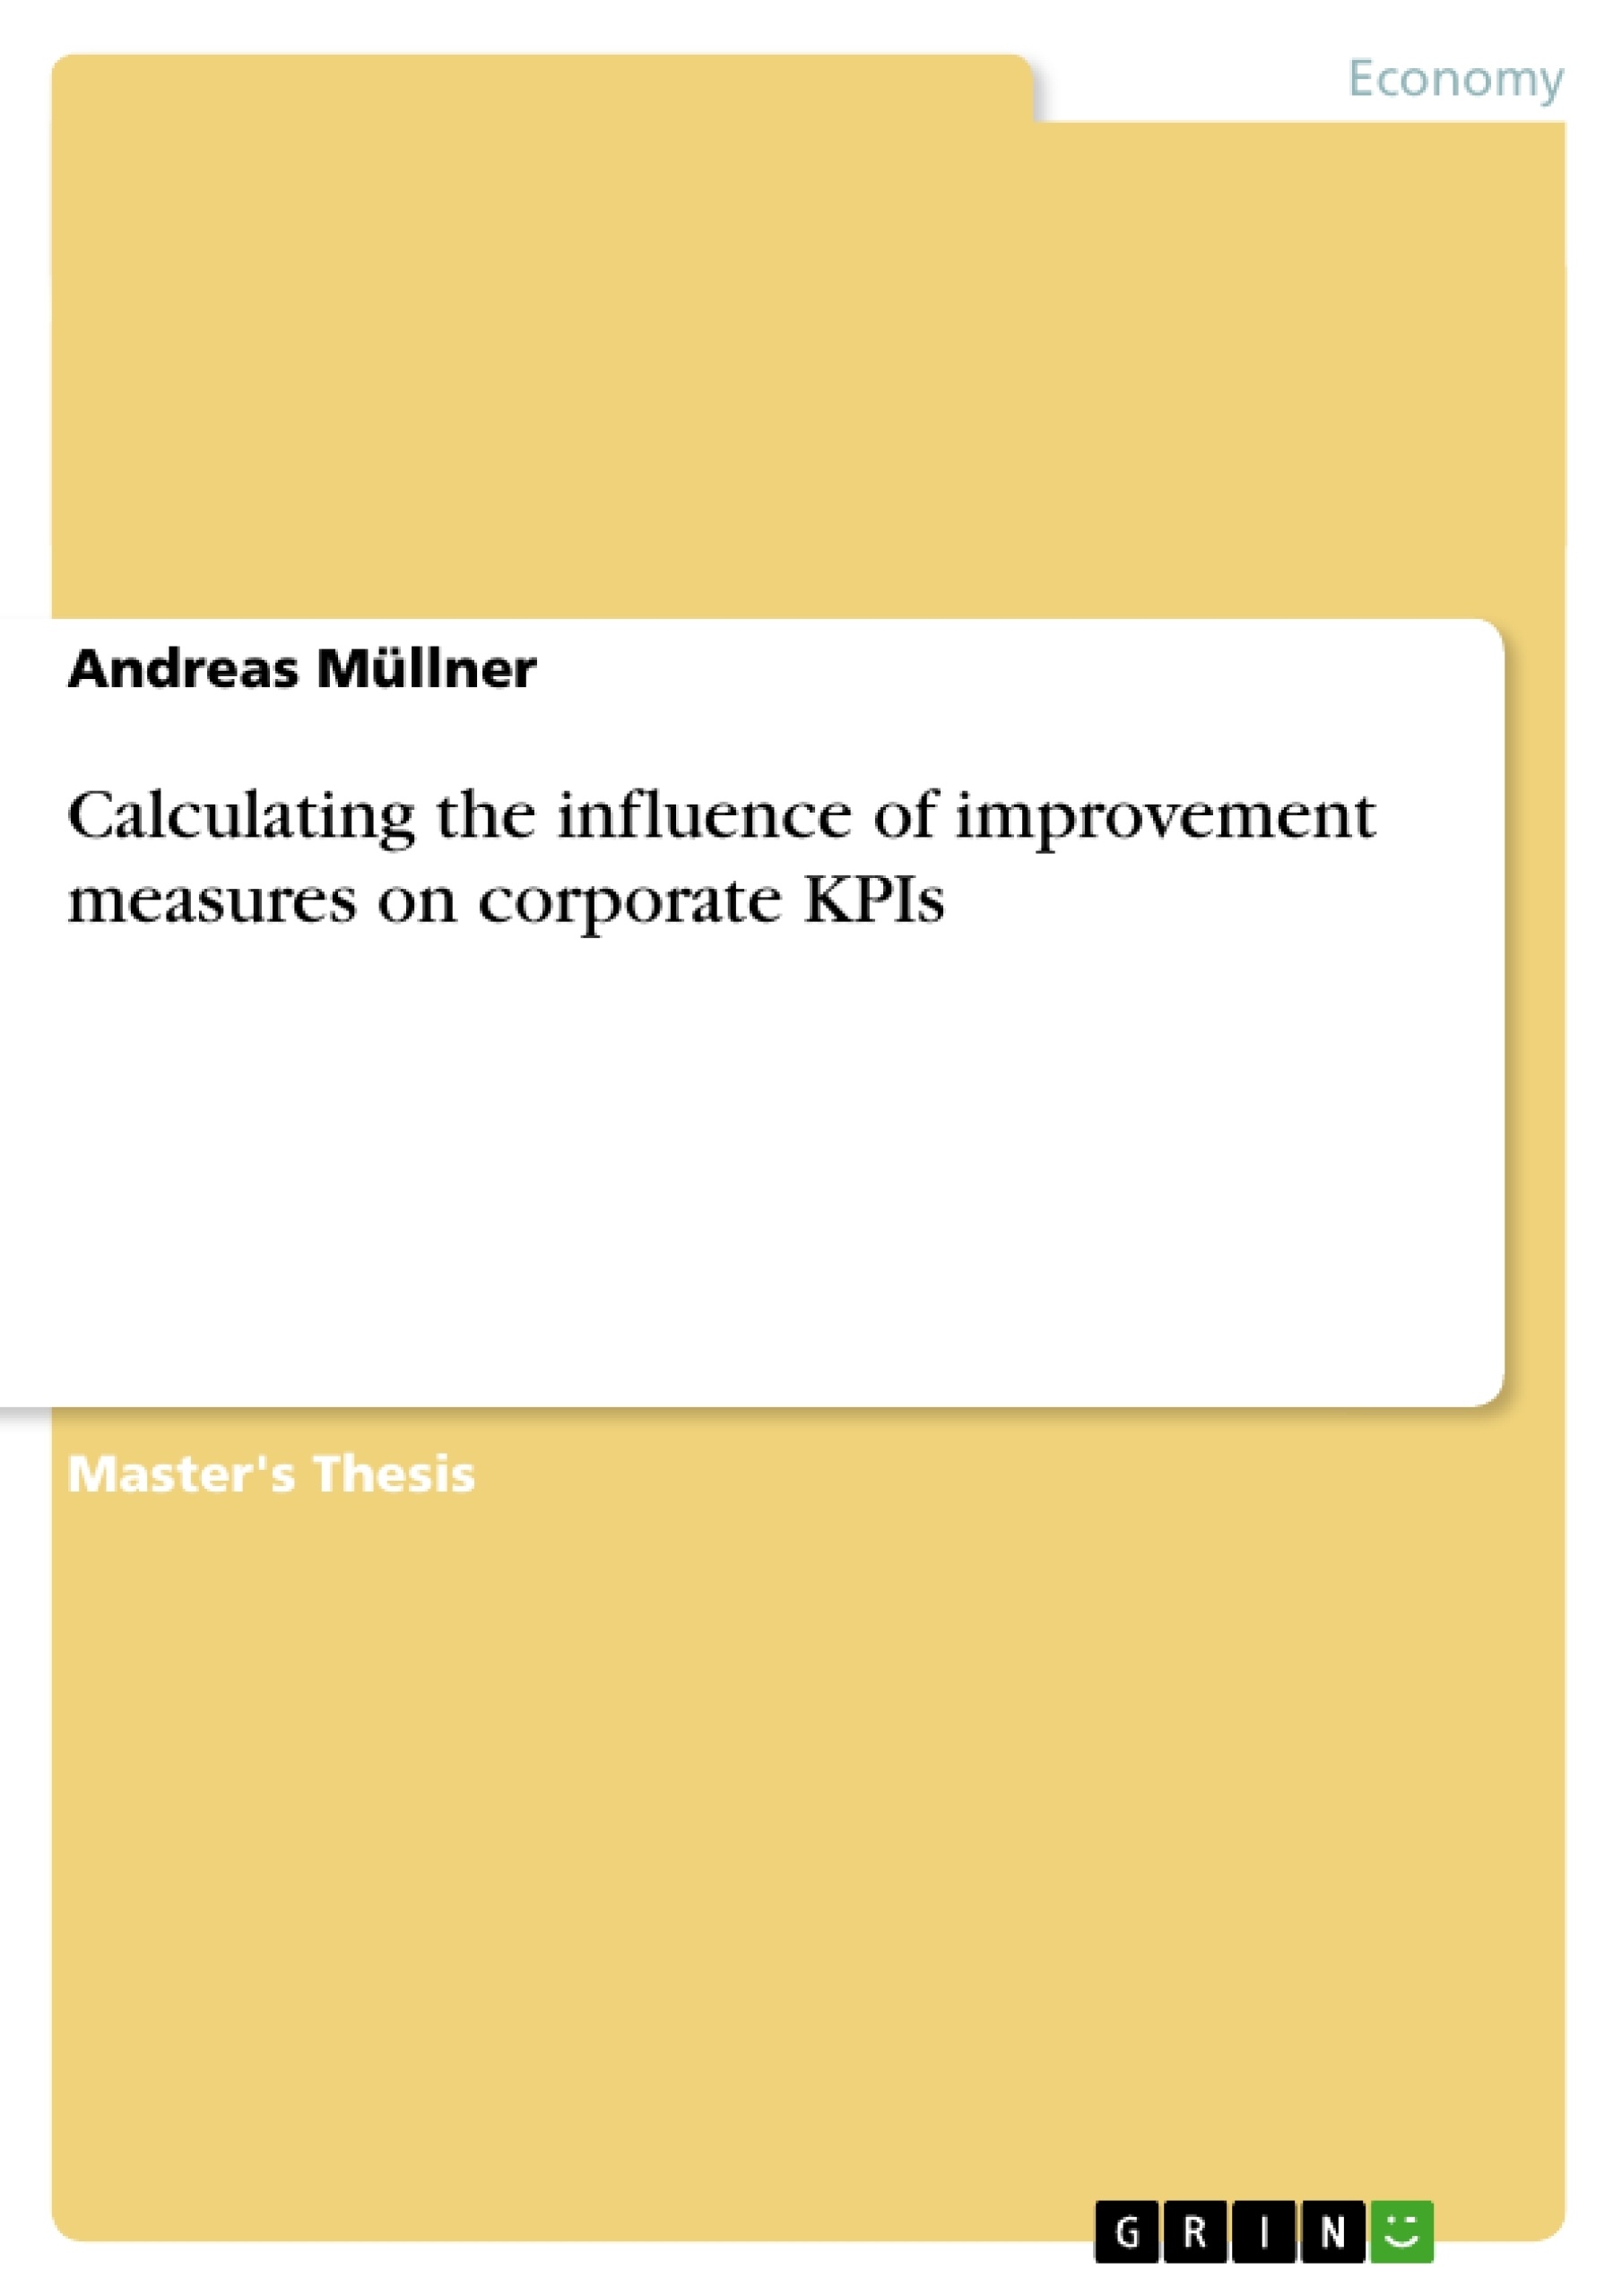 Title: Calculating the influence of improvement measures on corporate KPIs